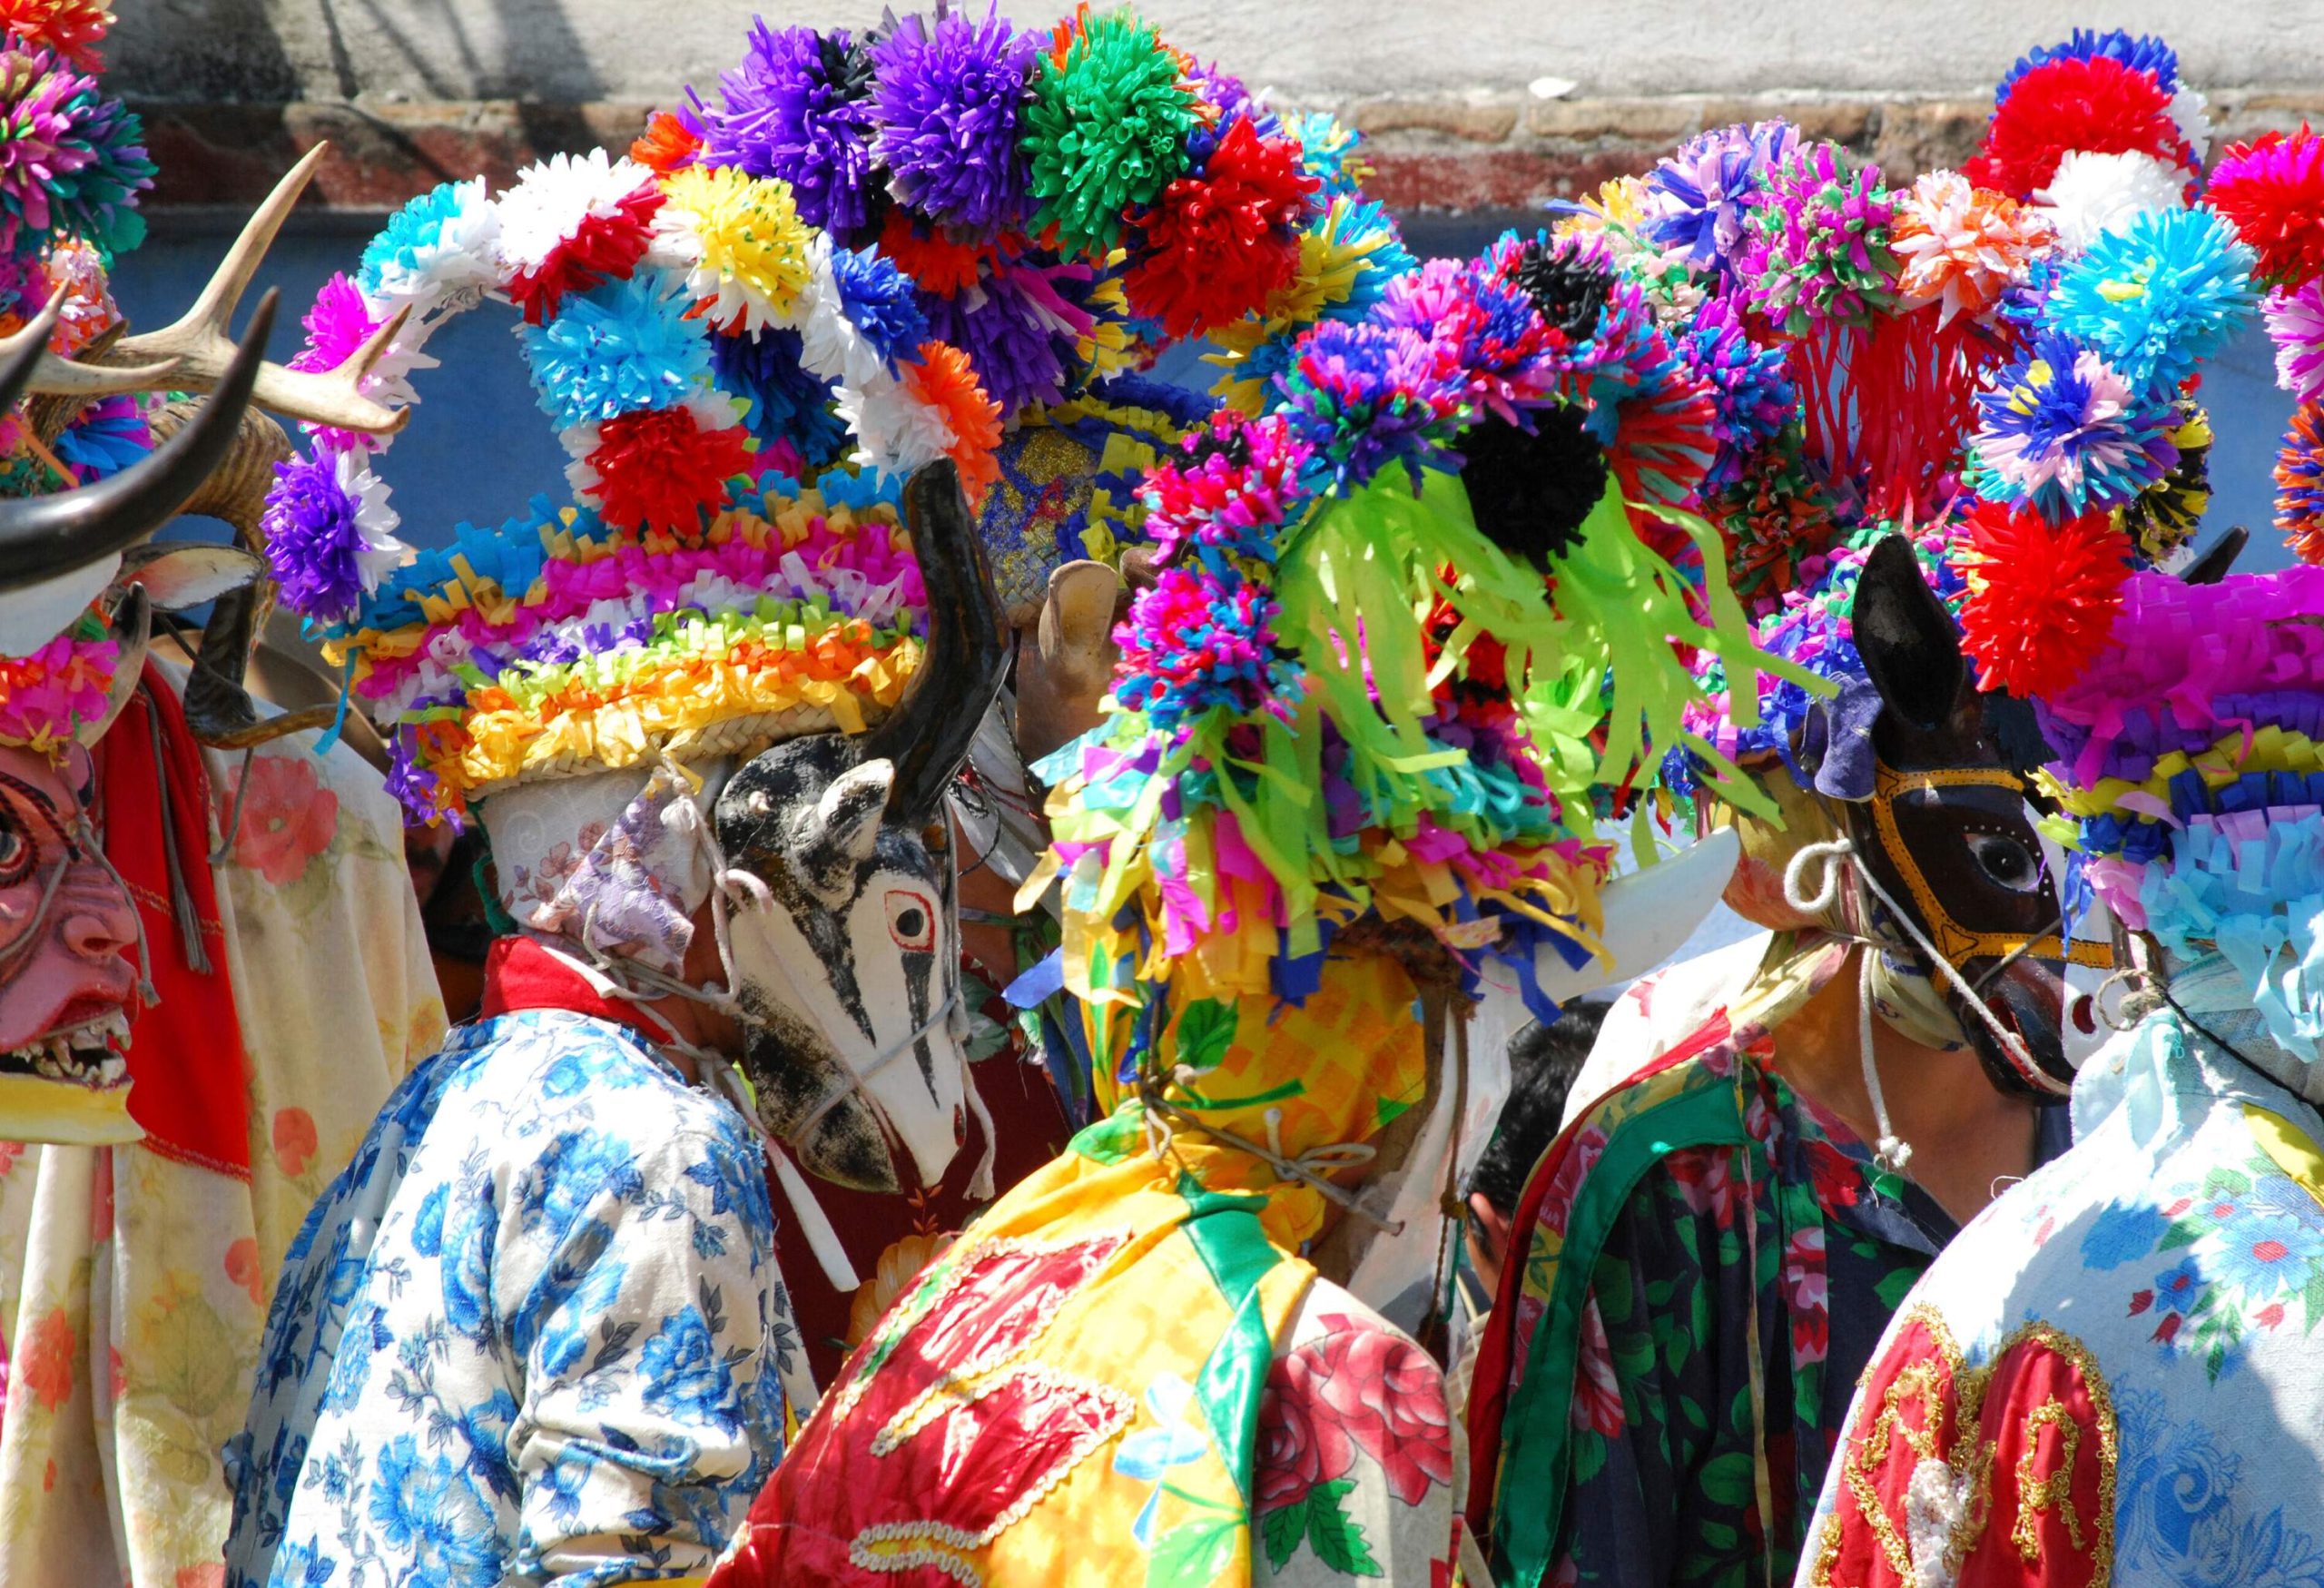 A group of people wearing colourful costumes, animal masks, and headdresses with vibrant papier-mâché flowers.